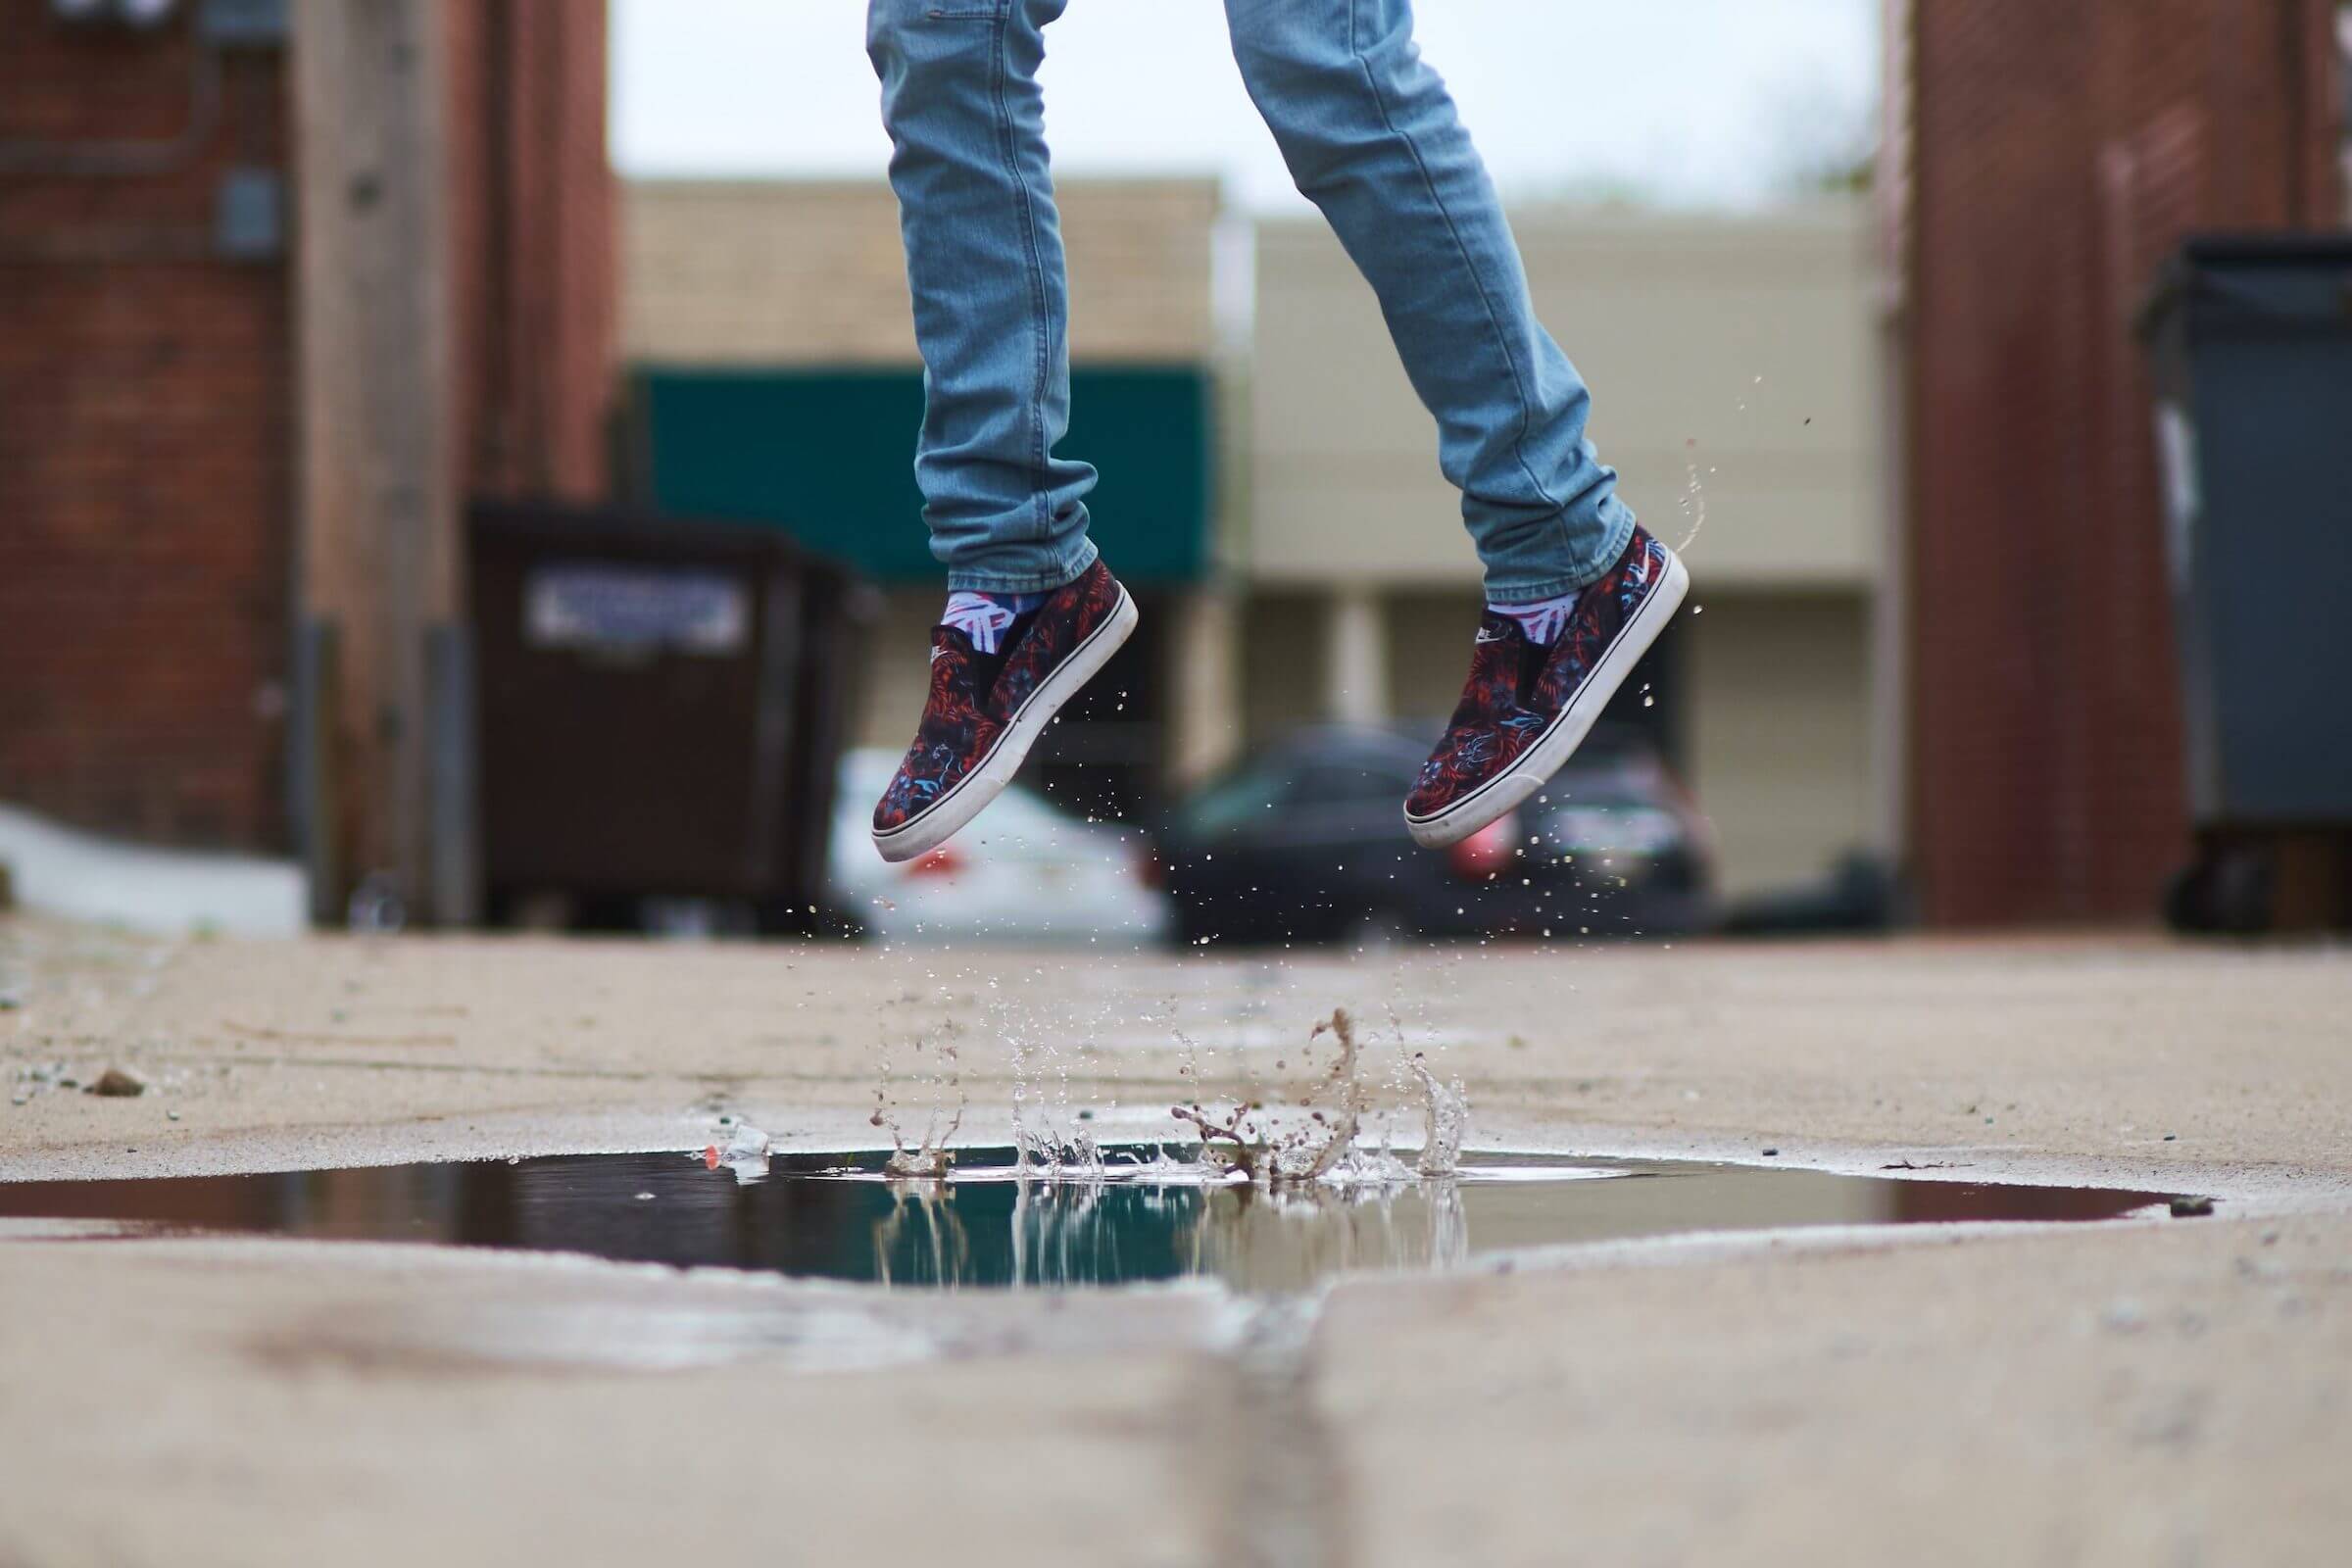 person wearing jeans jumping high in a puddle having fun